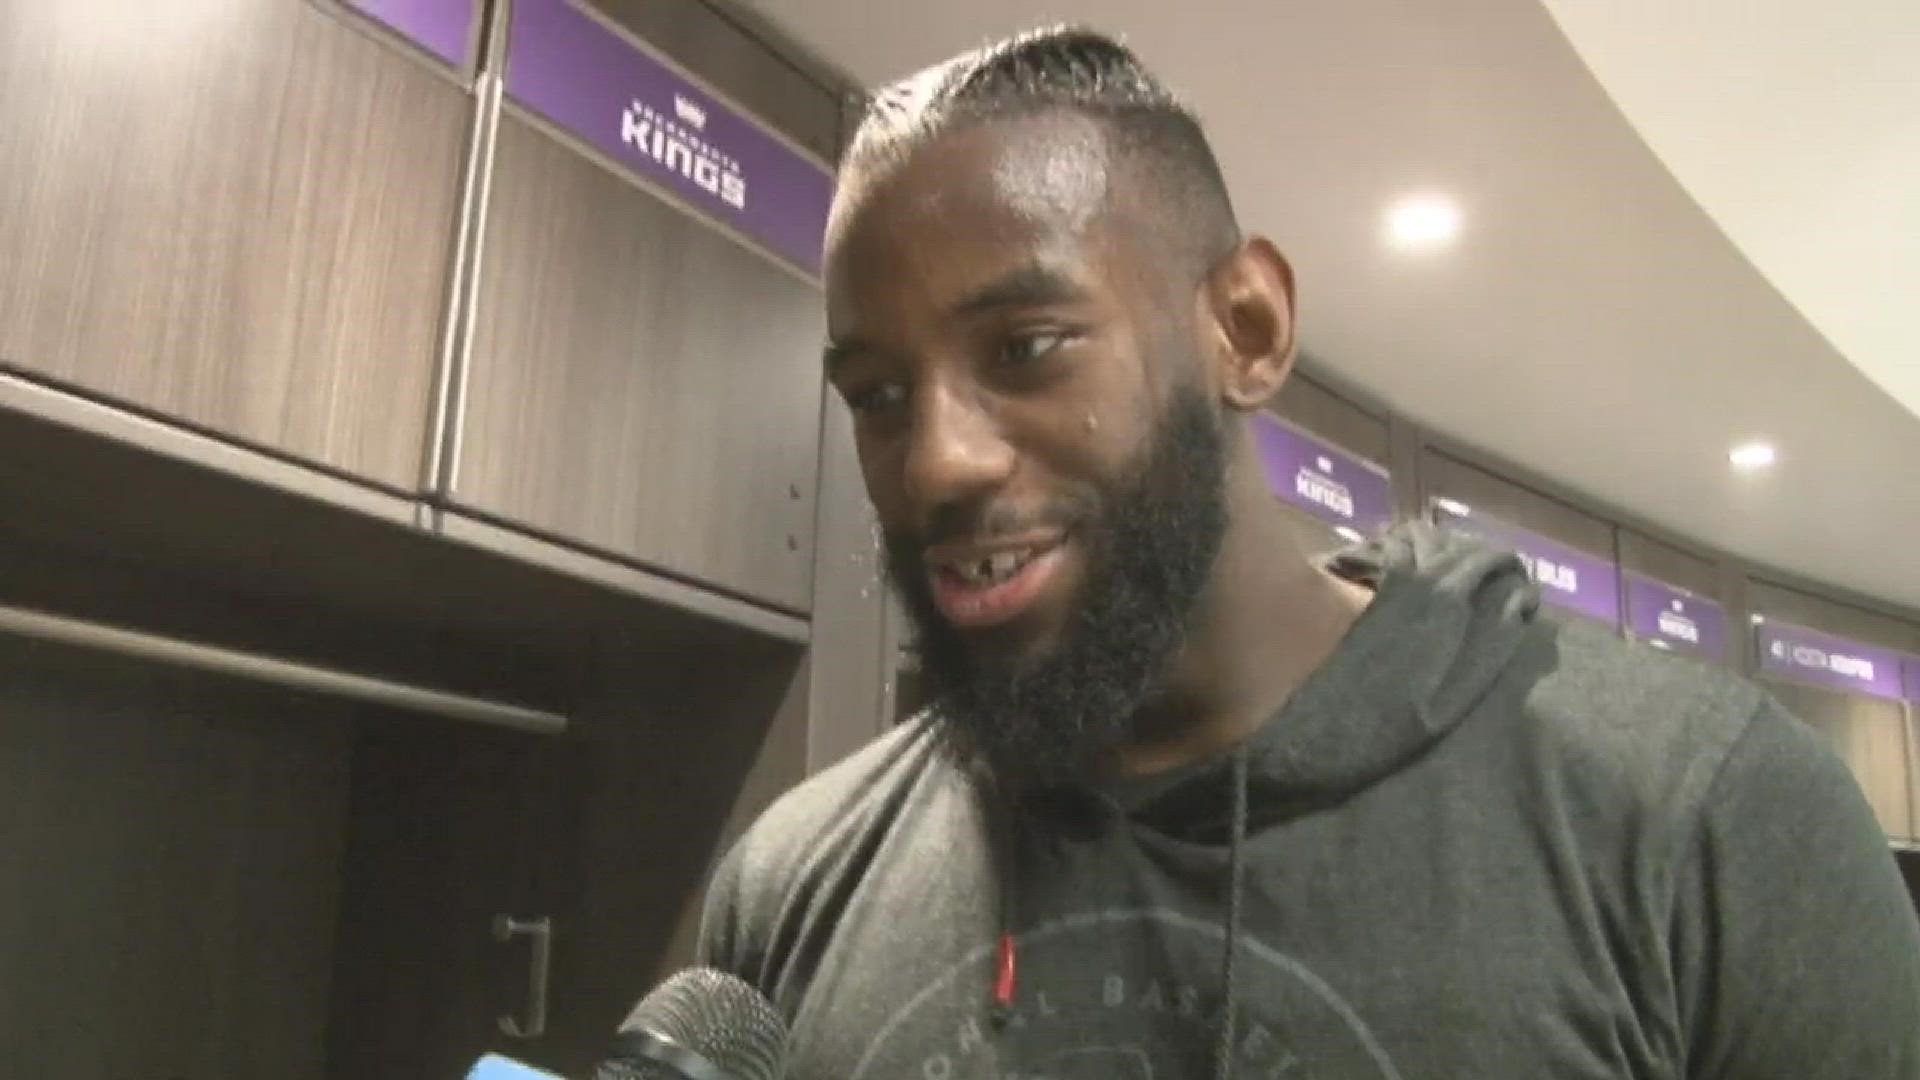 Kings two-way player JaKarr Sampson talks about his impact in Monday's win over the Chicago Bulls, having to play in Sacramento and the G-League in Reno and itching for playing time.